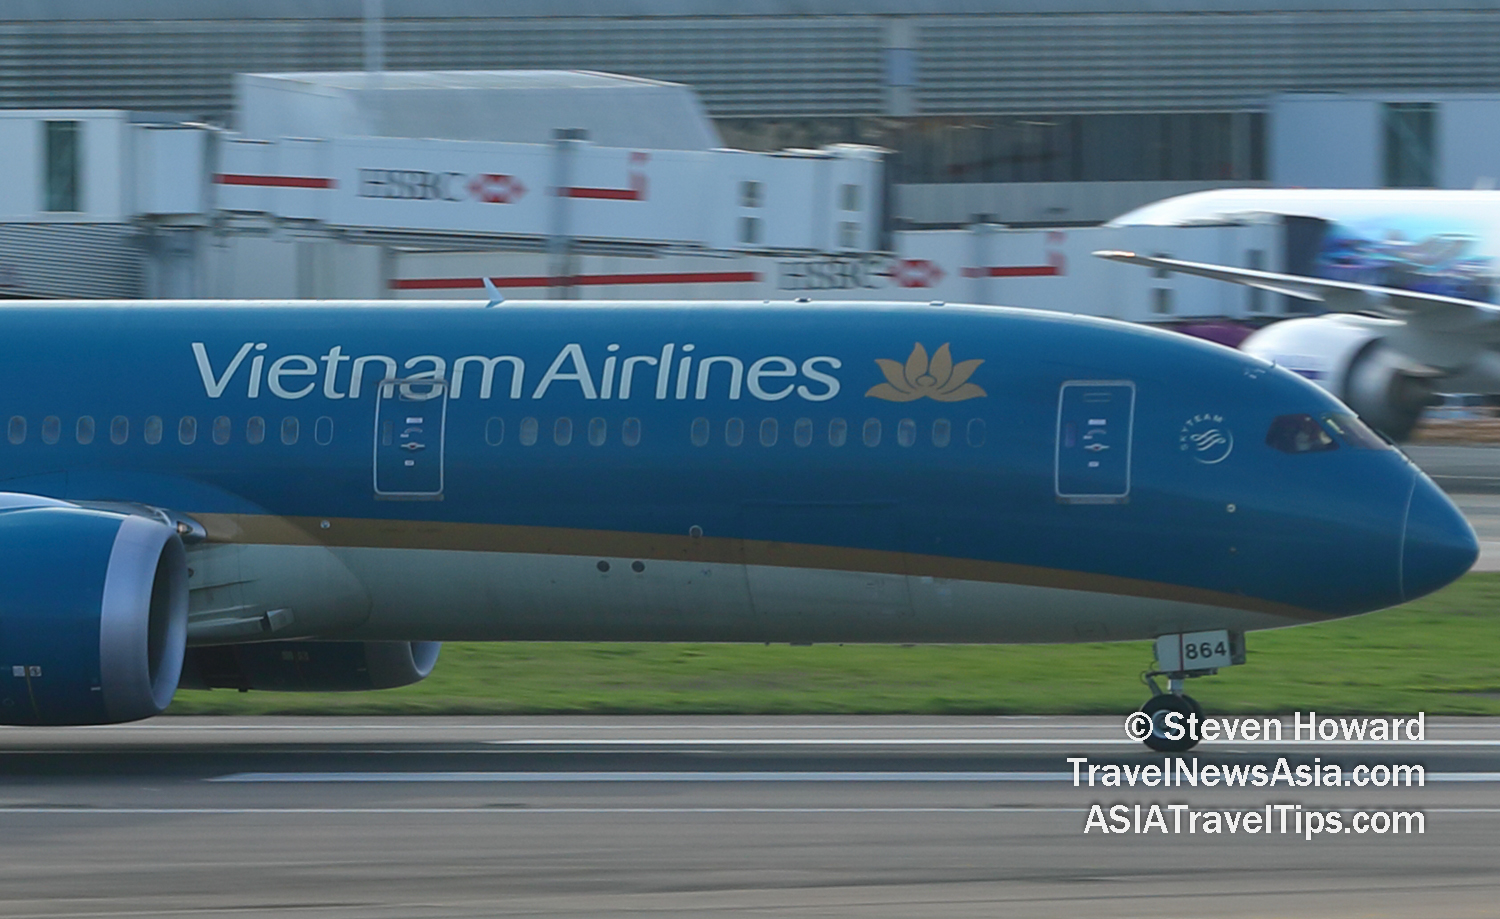 Vietnam Airlines Boeing 787-8 reg: VN-A864. Picture by Steven Howard of TravelNewsAsia.com Click to enlarge.